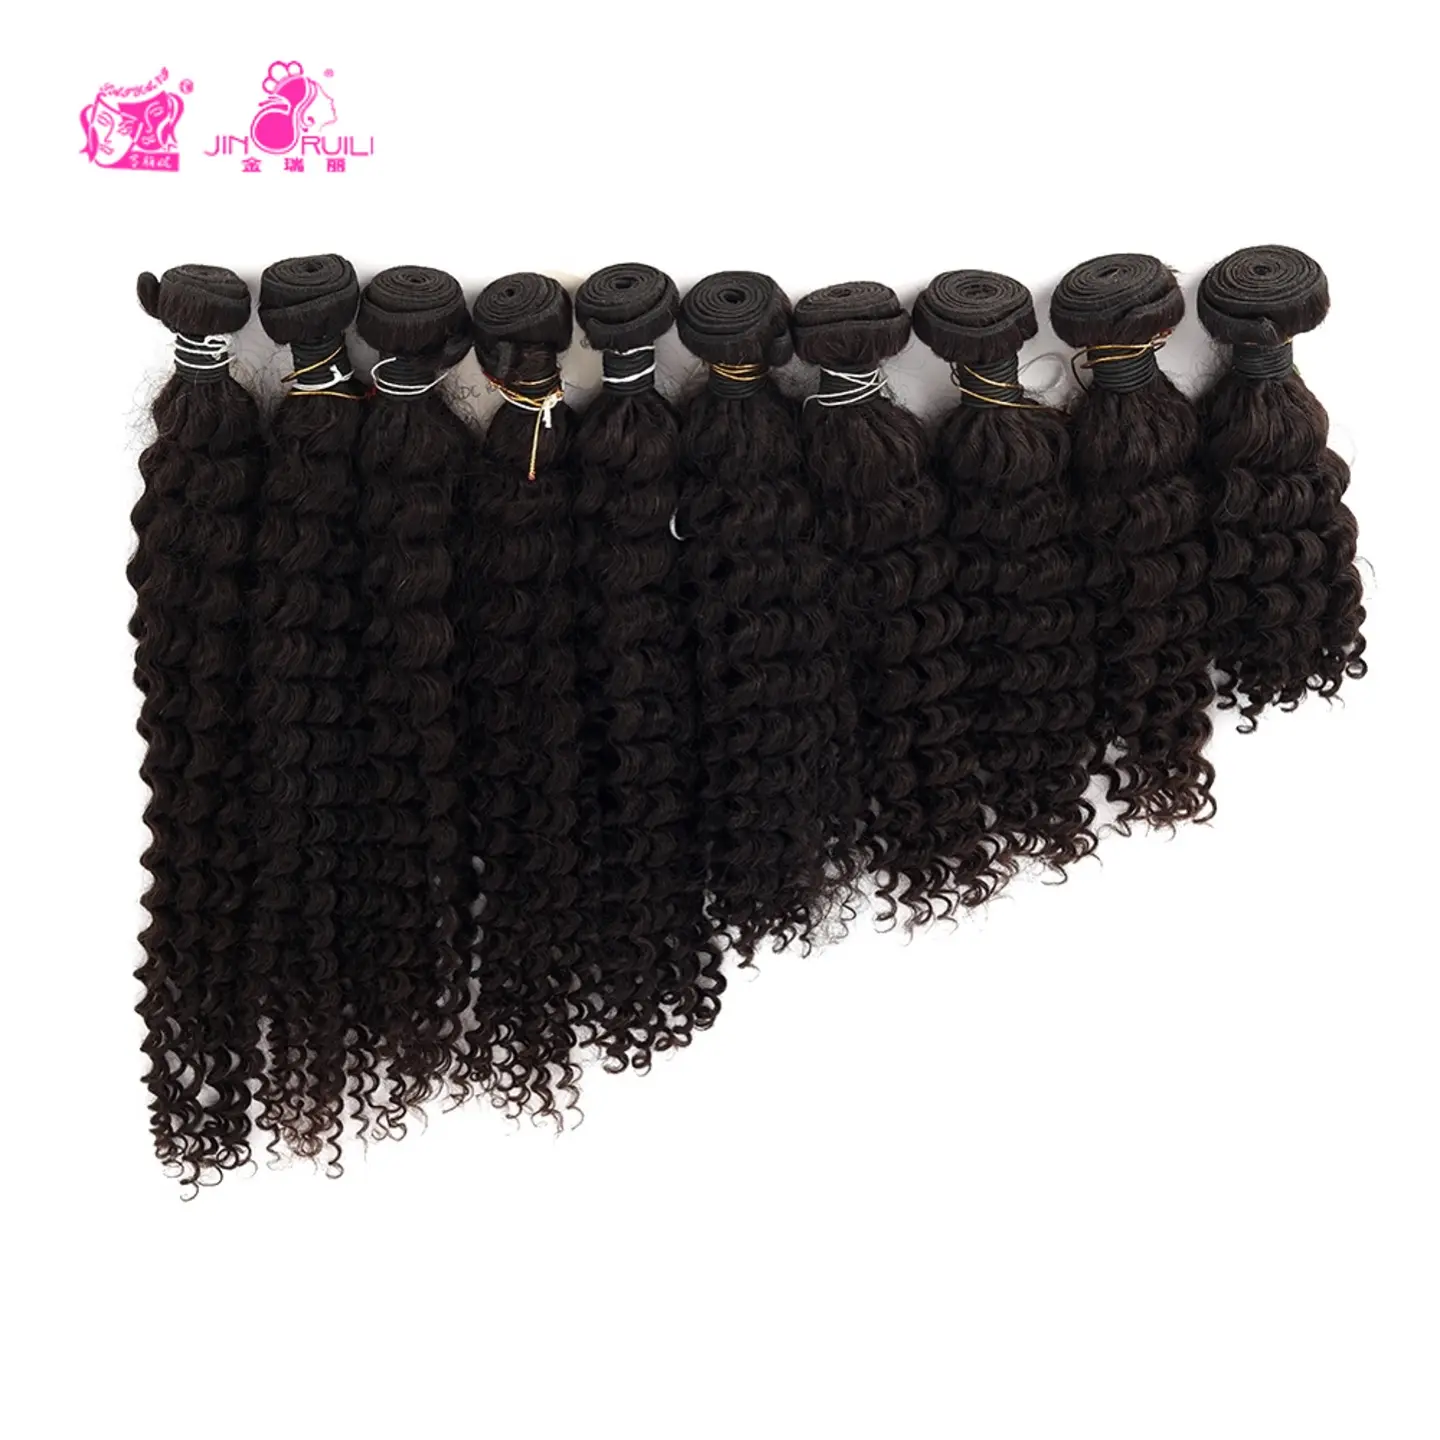 JINRUILI Customizable Hair Extension 12/18/22/26inch Black Afro Wave/Deep Wave/Curly Double Weft Natural Hair Bundles for Woman